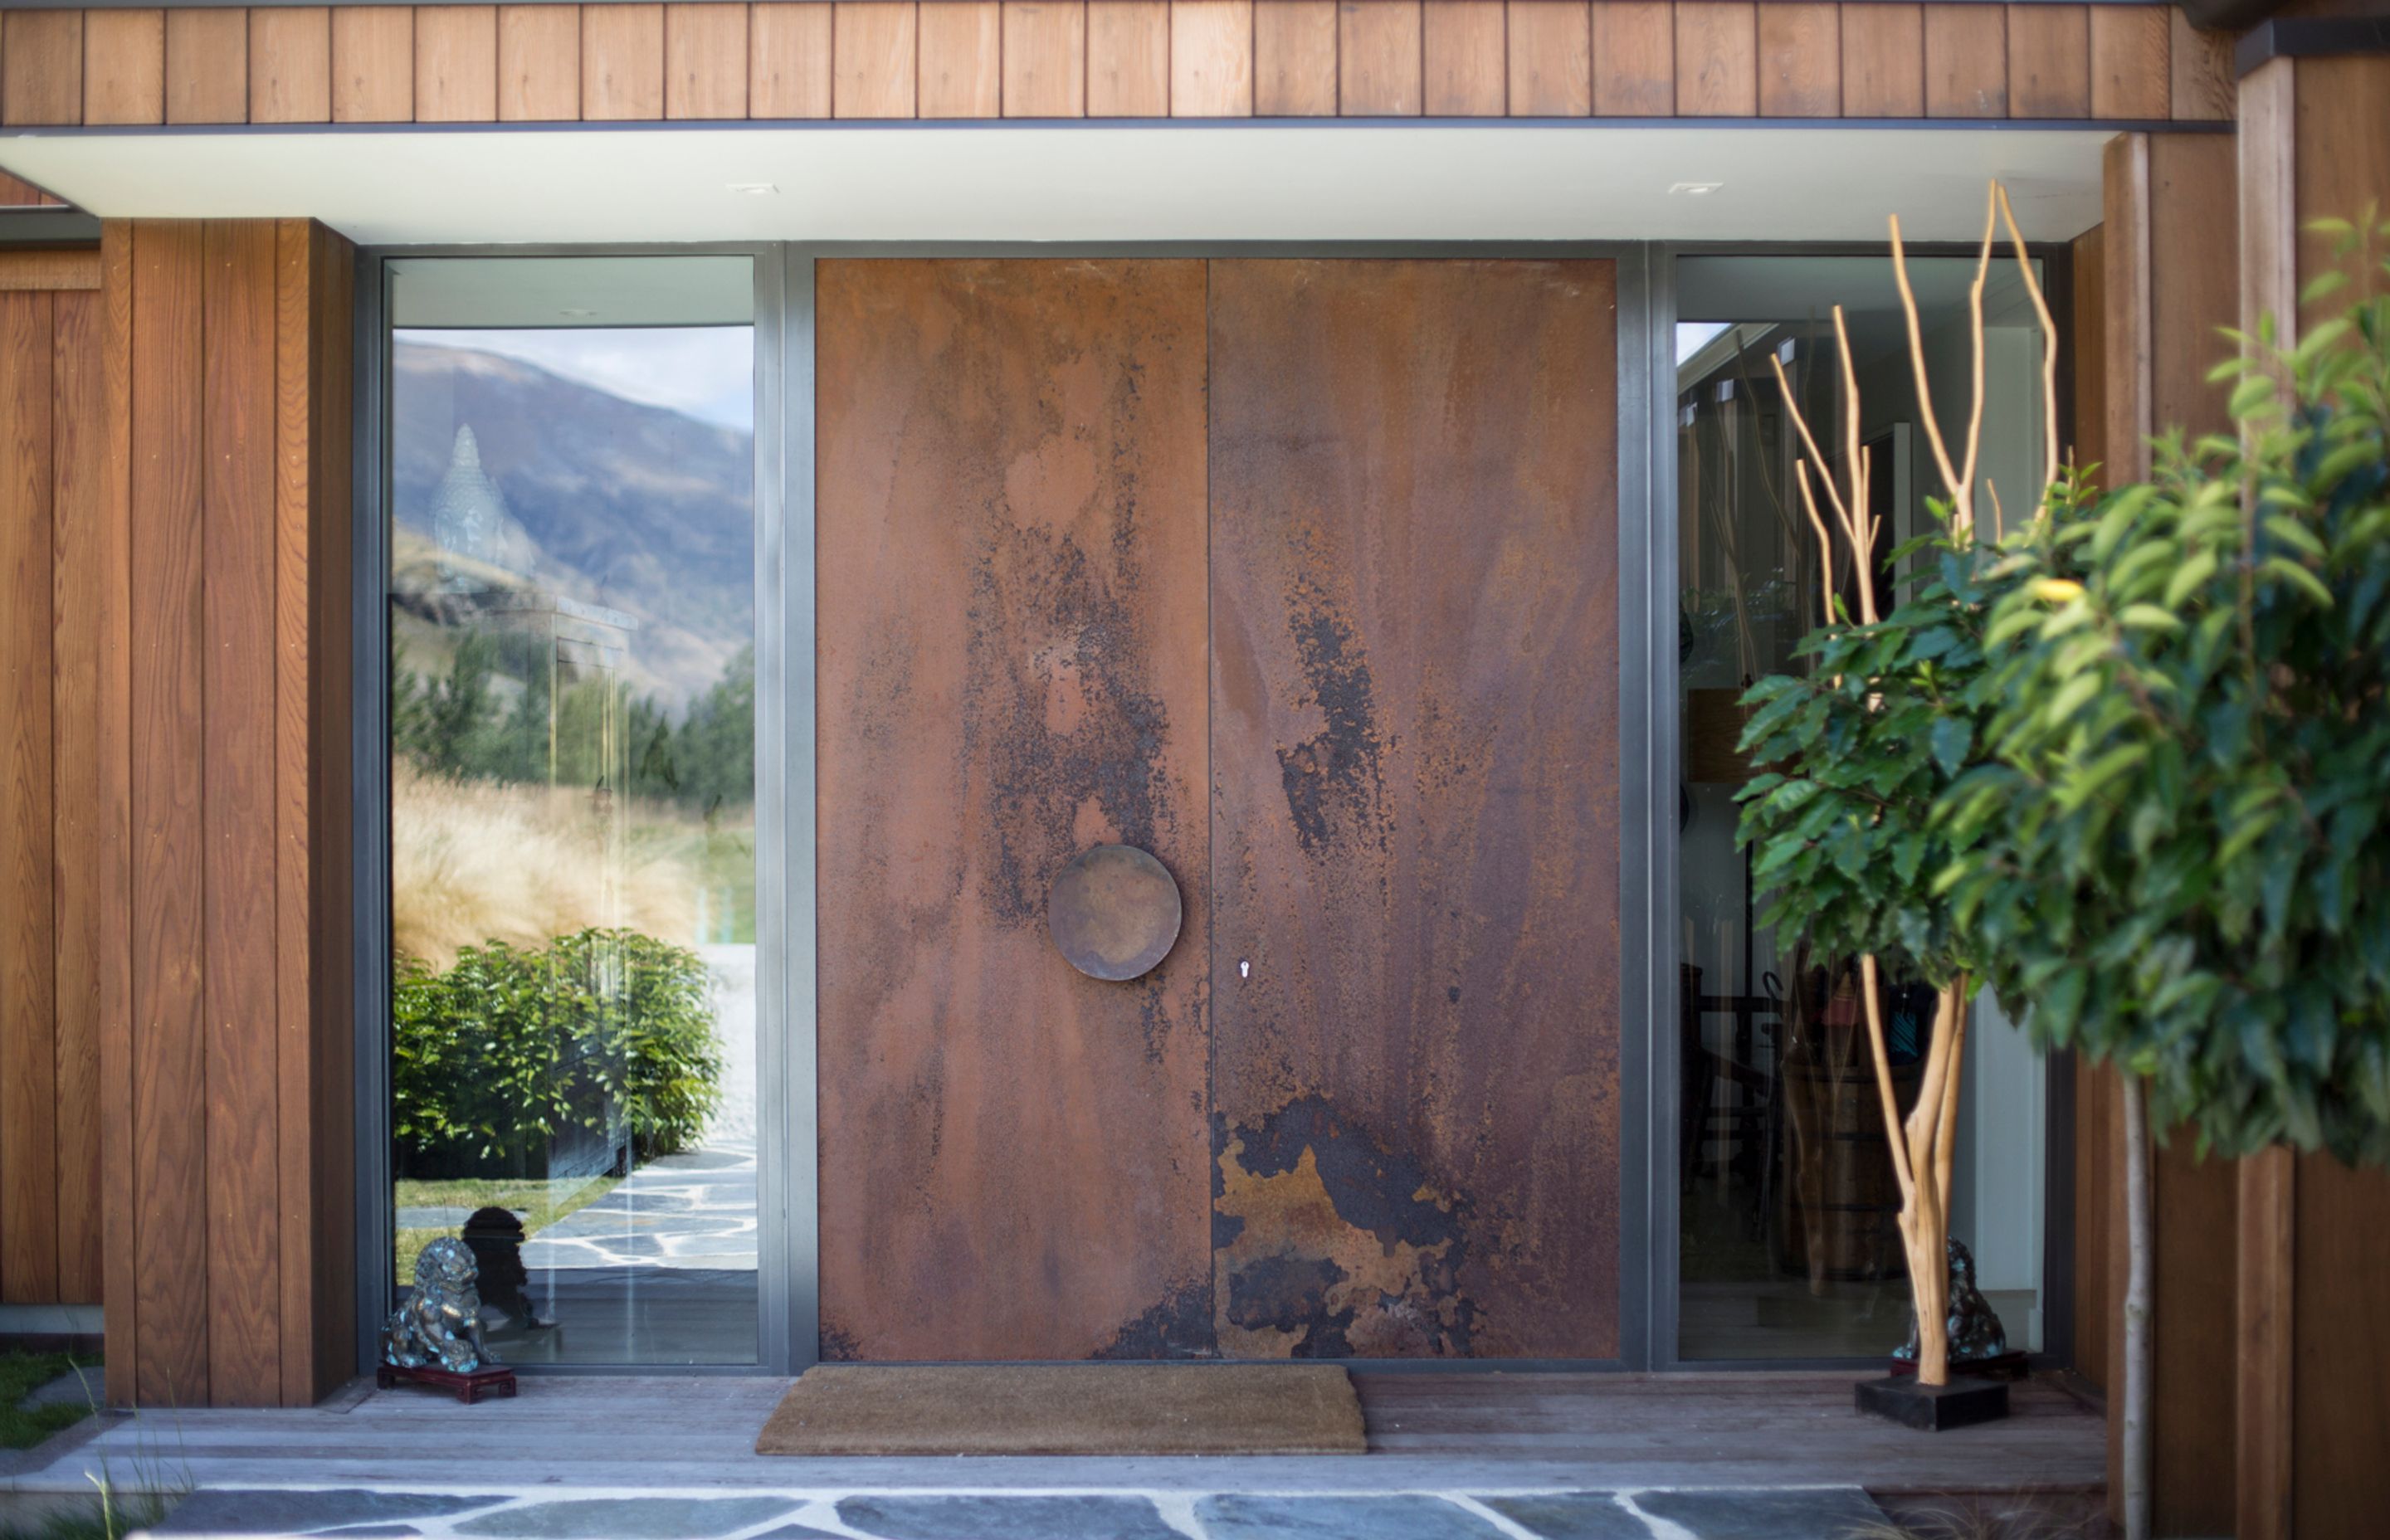 Corten entry doors add a further textural element to the scheme and also complement the rugged nature of the surroundings.